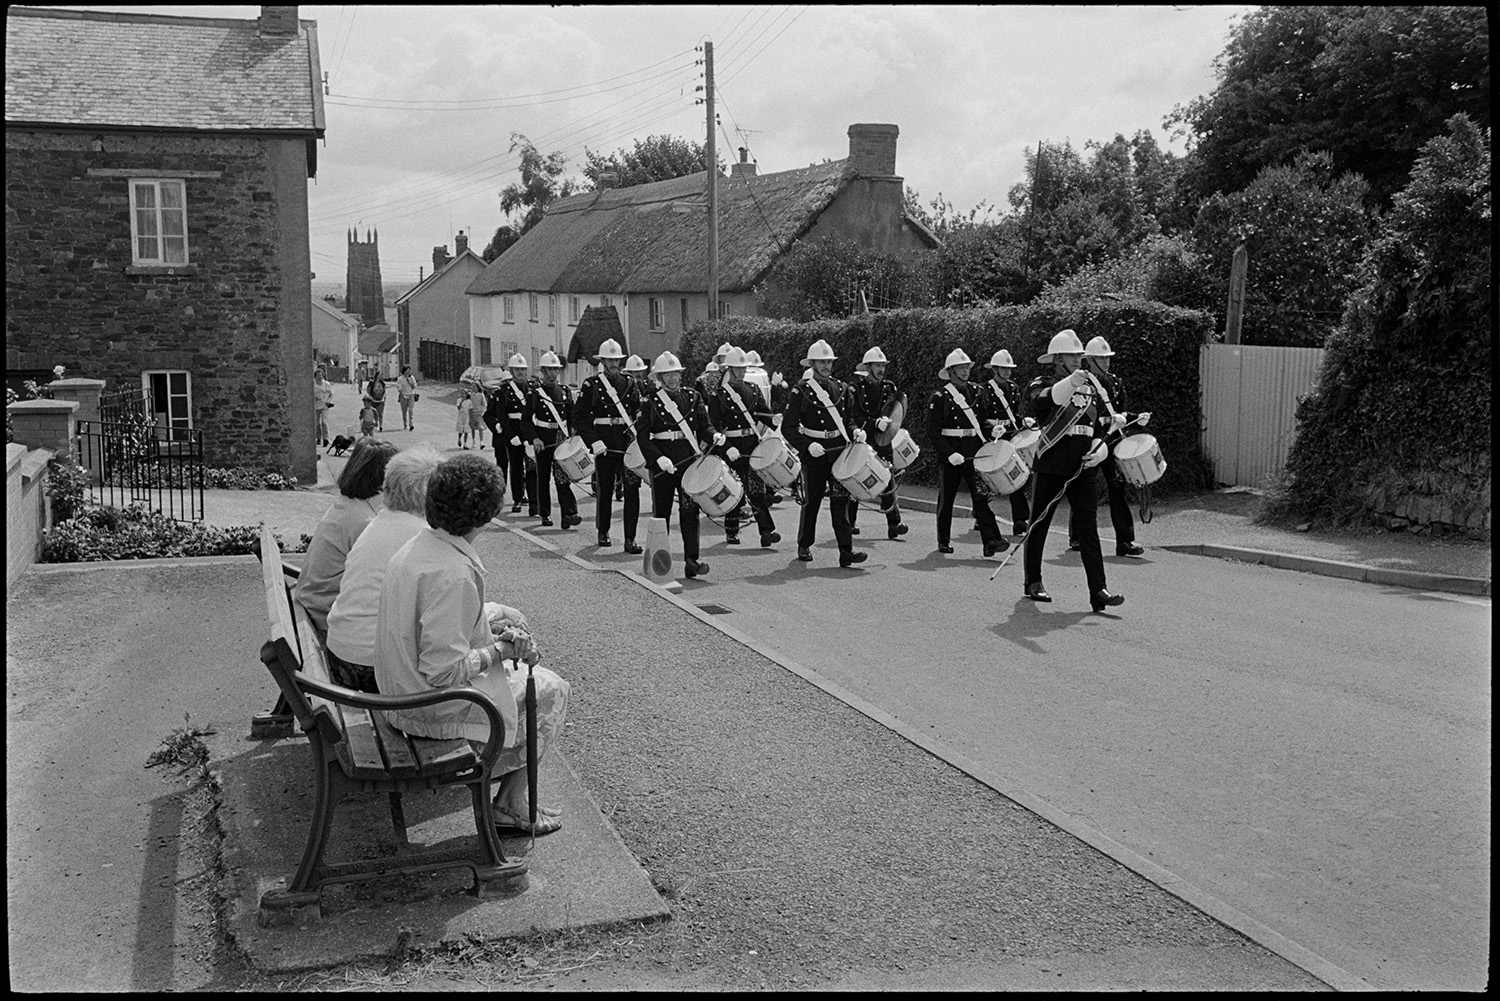 Corps of drums parading before fair procession with queen and fancy dress entries.
[Three women sitting on a bench by a road watching a Corps of drums marching down a street at Chulmleigh Fair. Chulmleigh Church can be seen in the background.]